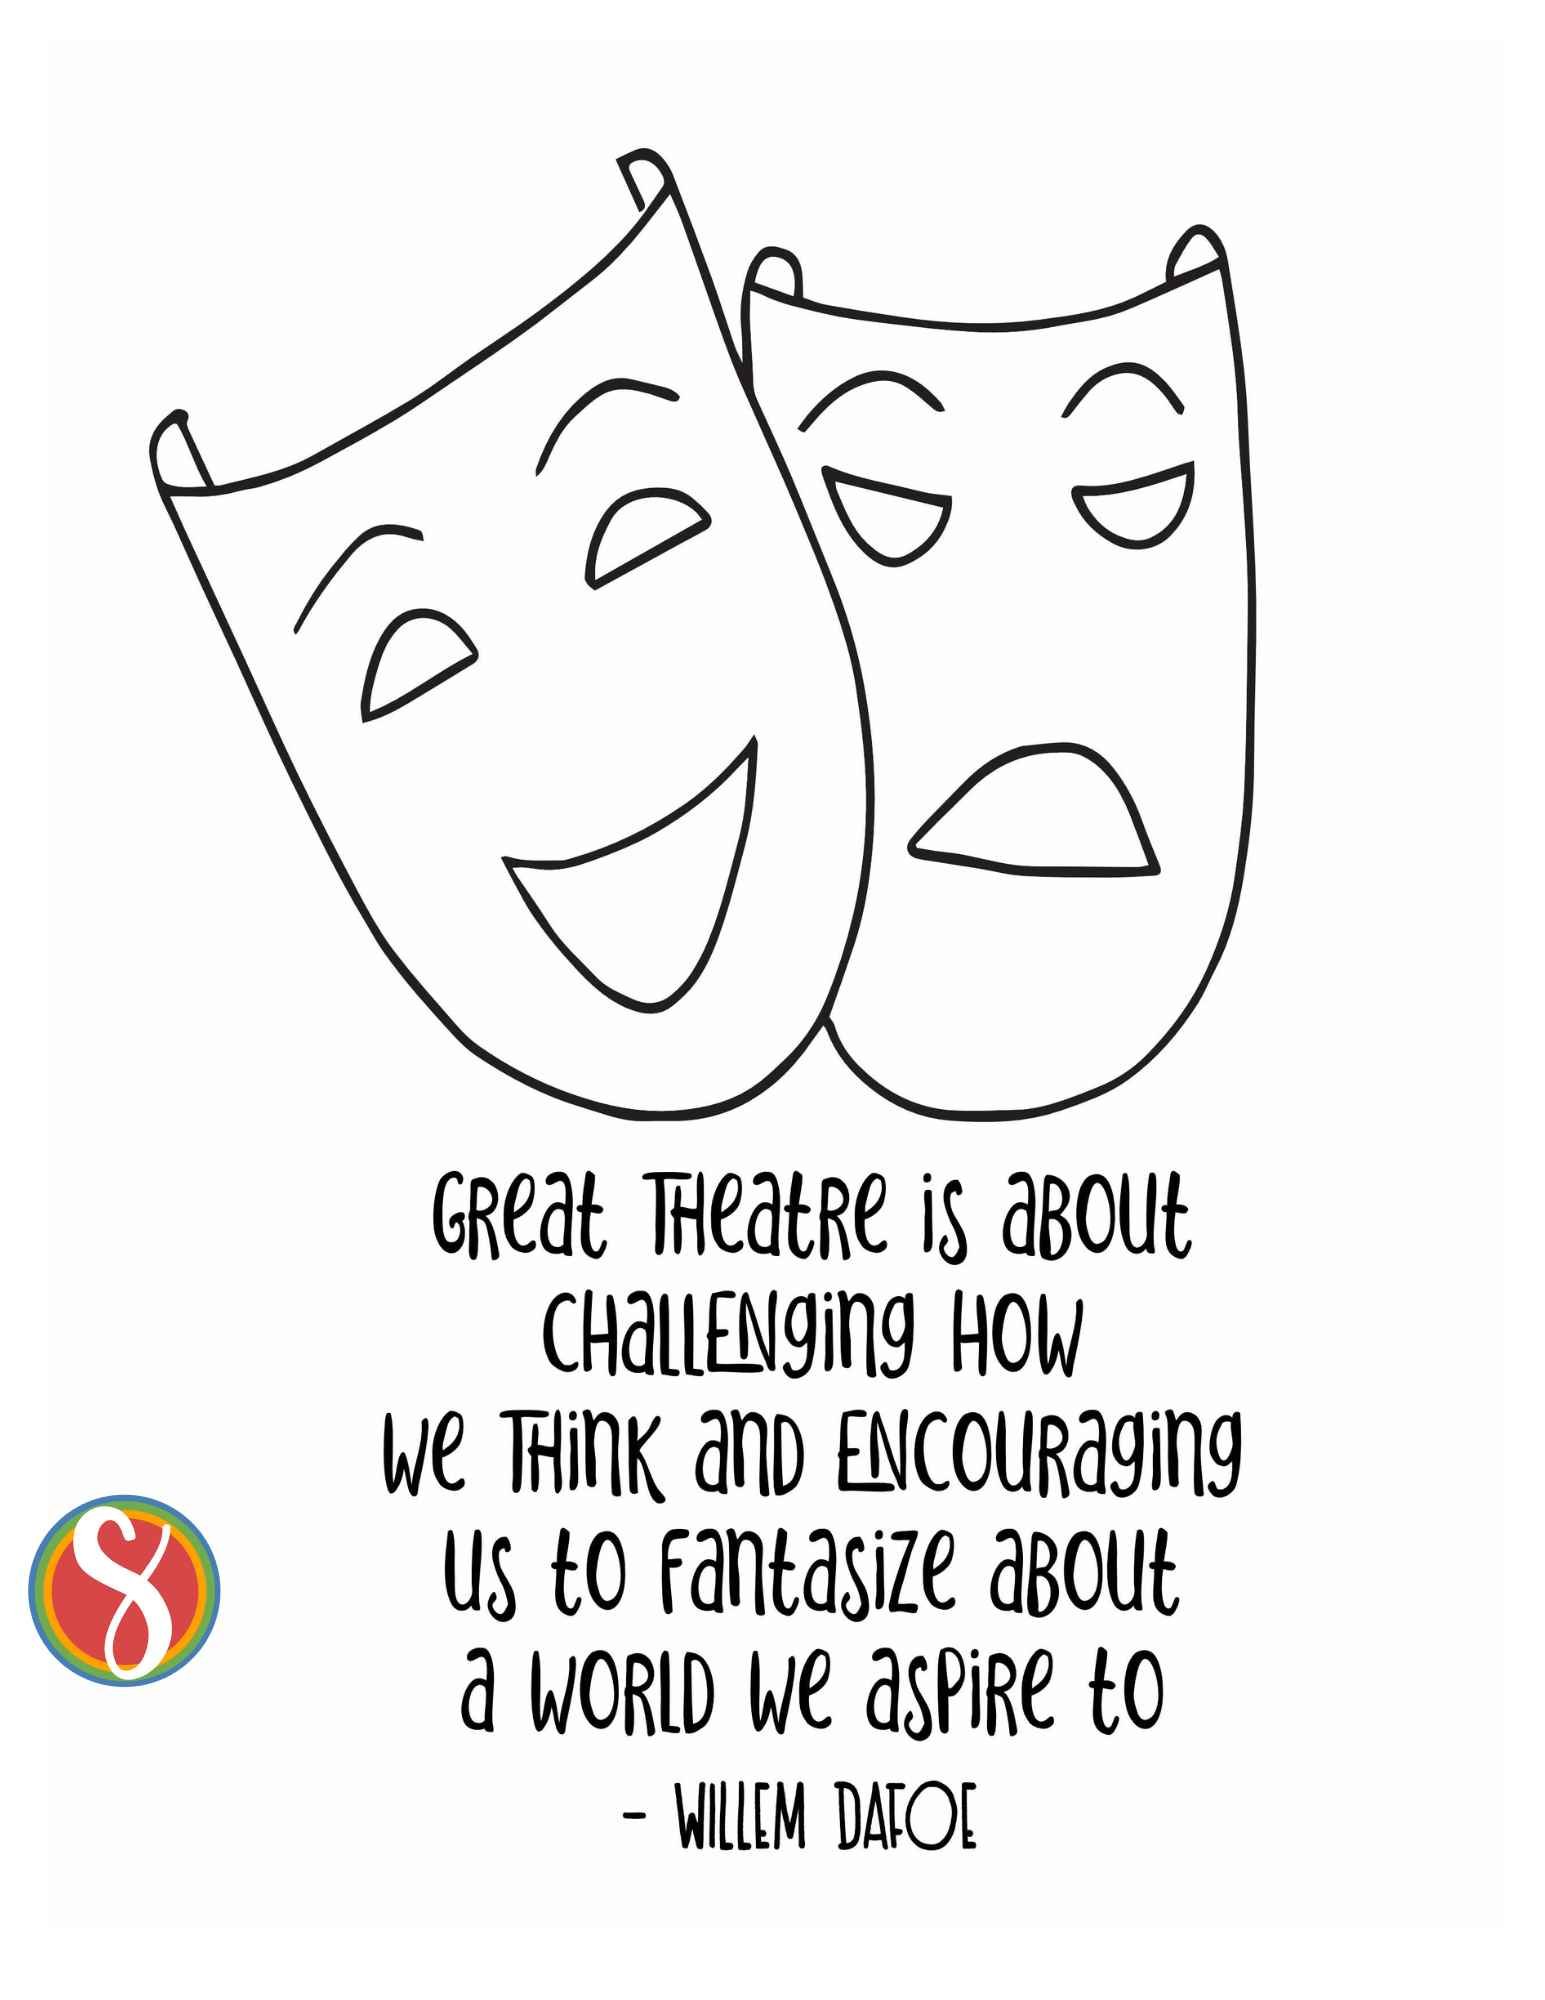 Quotes about theater coloring pages â stevie doodles